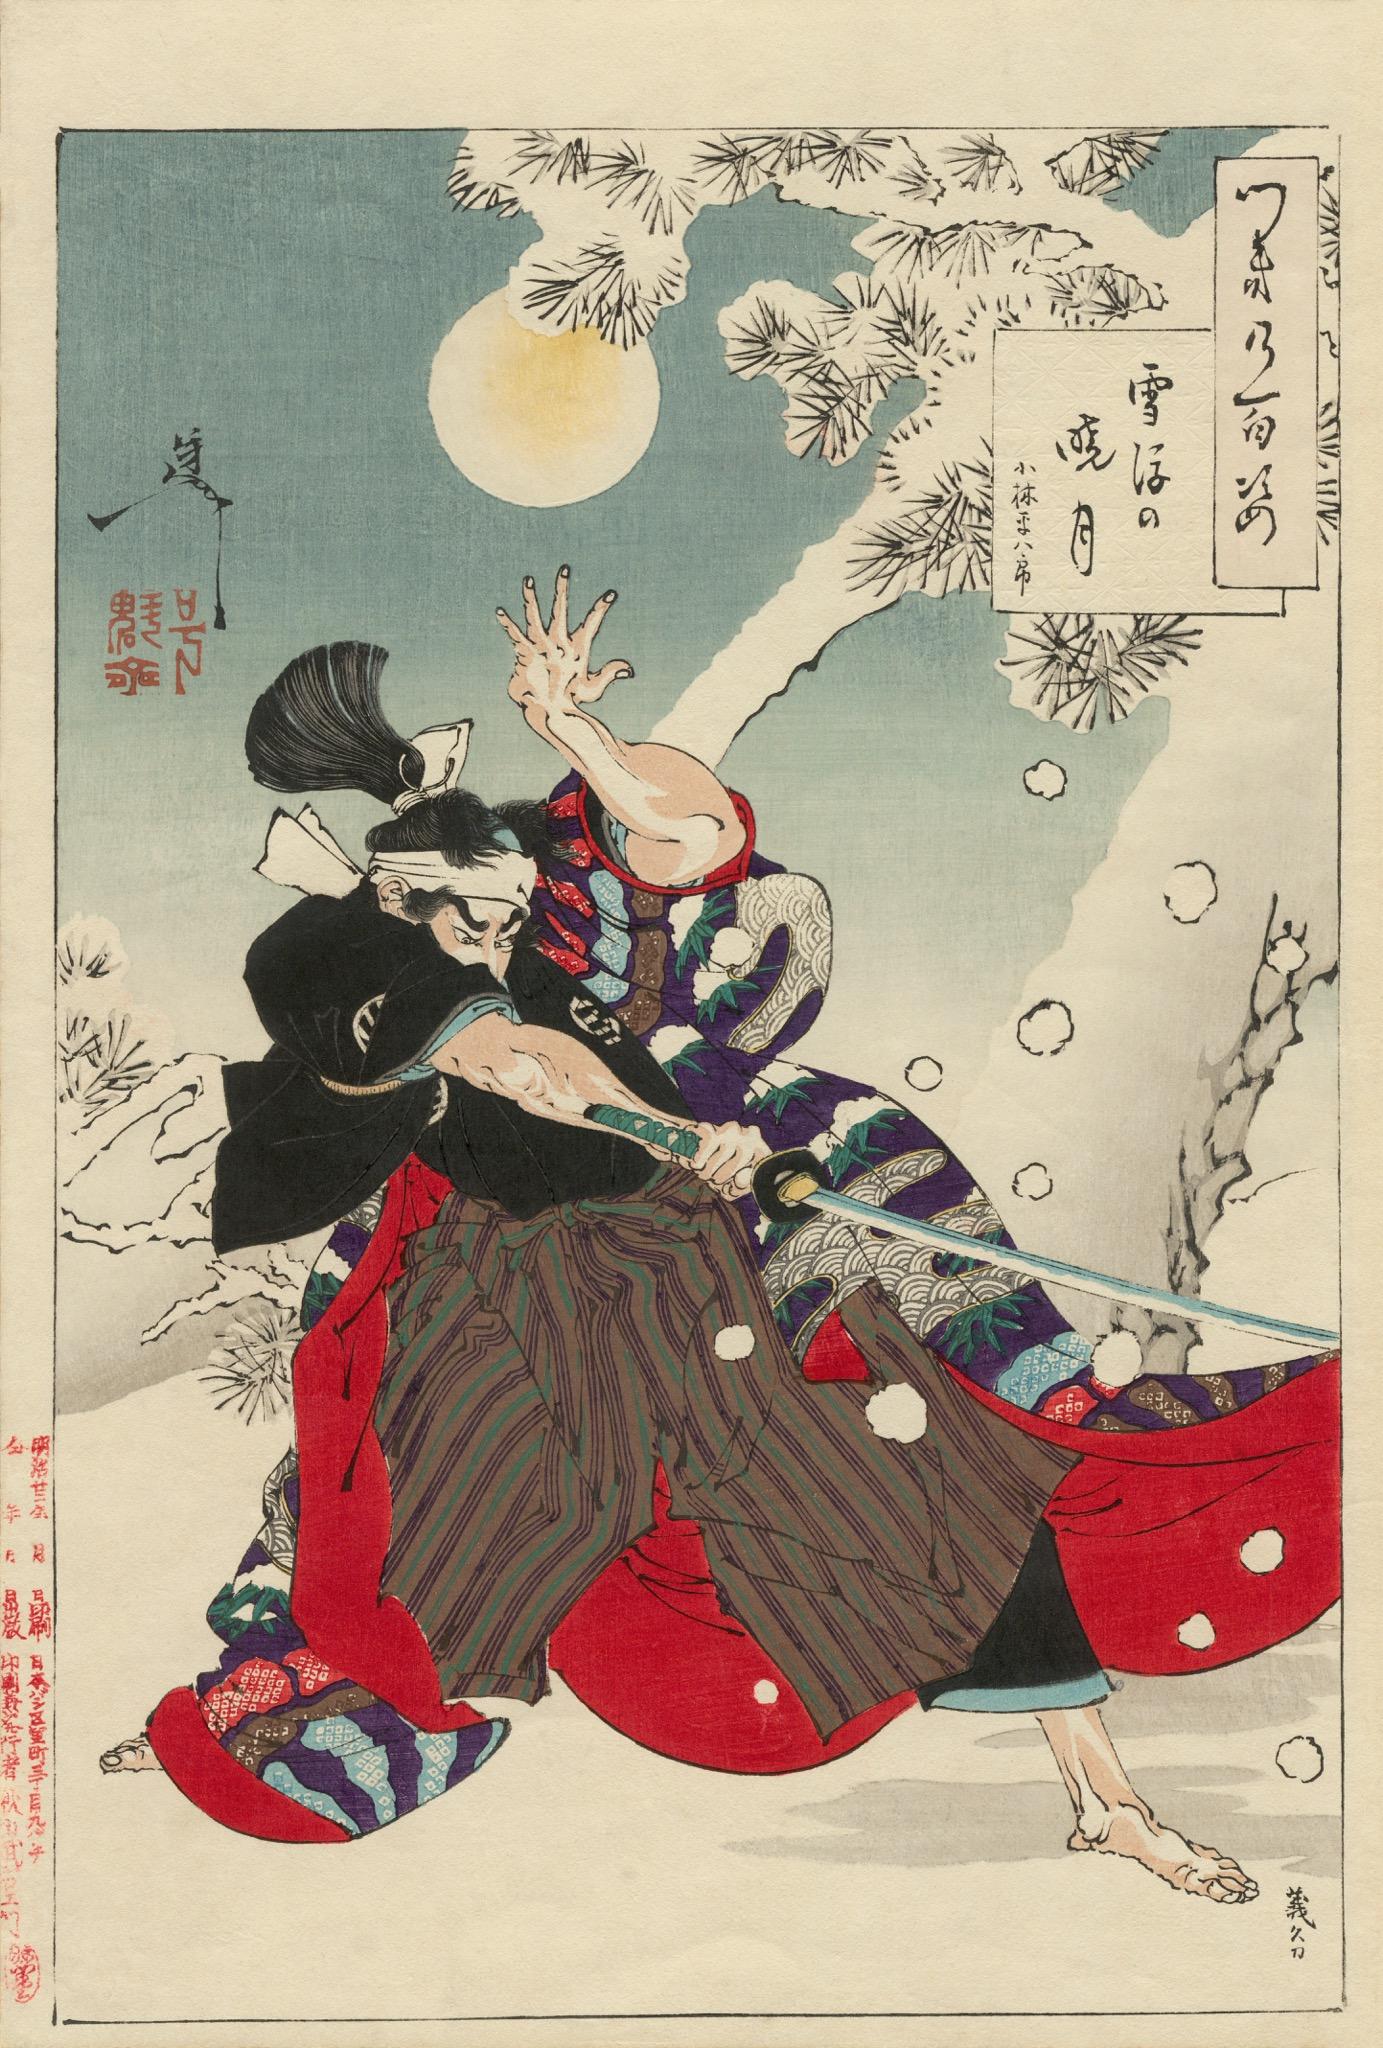 This is an original Yoshitoshi woodblock print from 1886.

This is a Japanese Meiji era ukiyo-e (woodblock print). It is from the series 